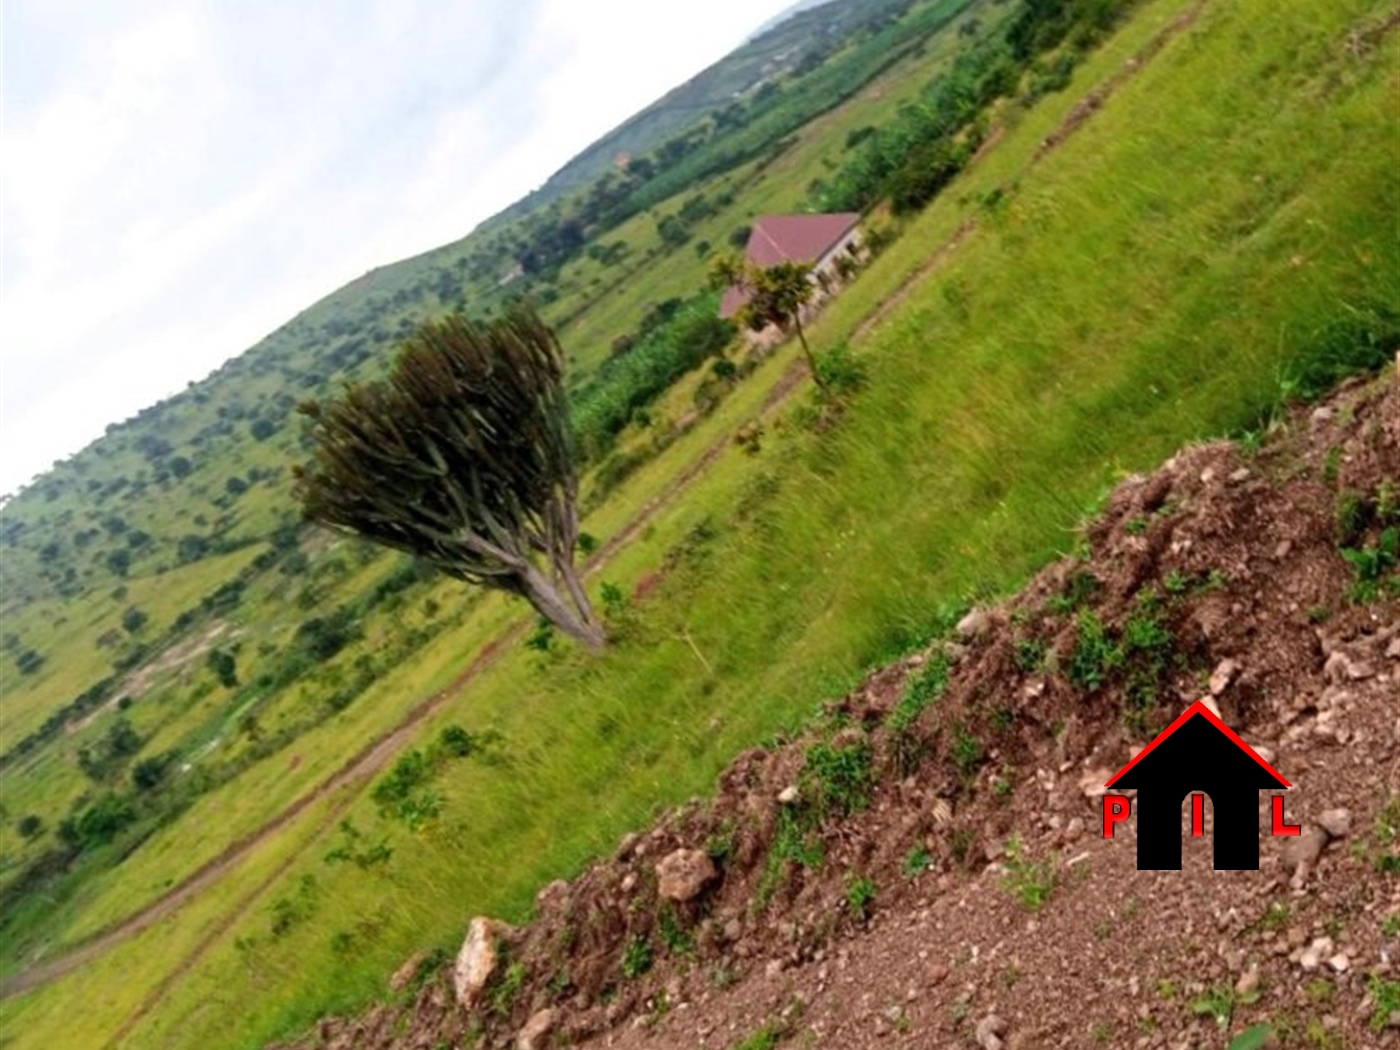 Commercial Land for sale in Biharwe Mbarara